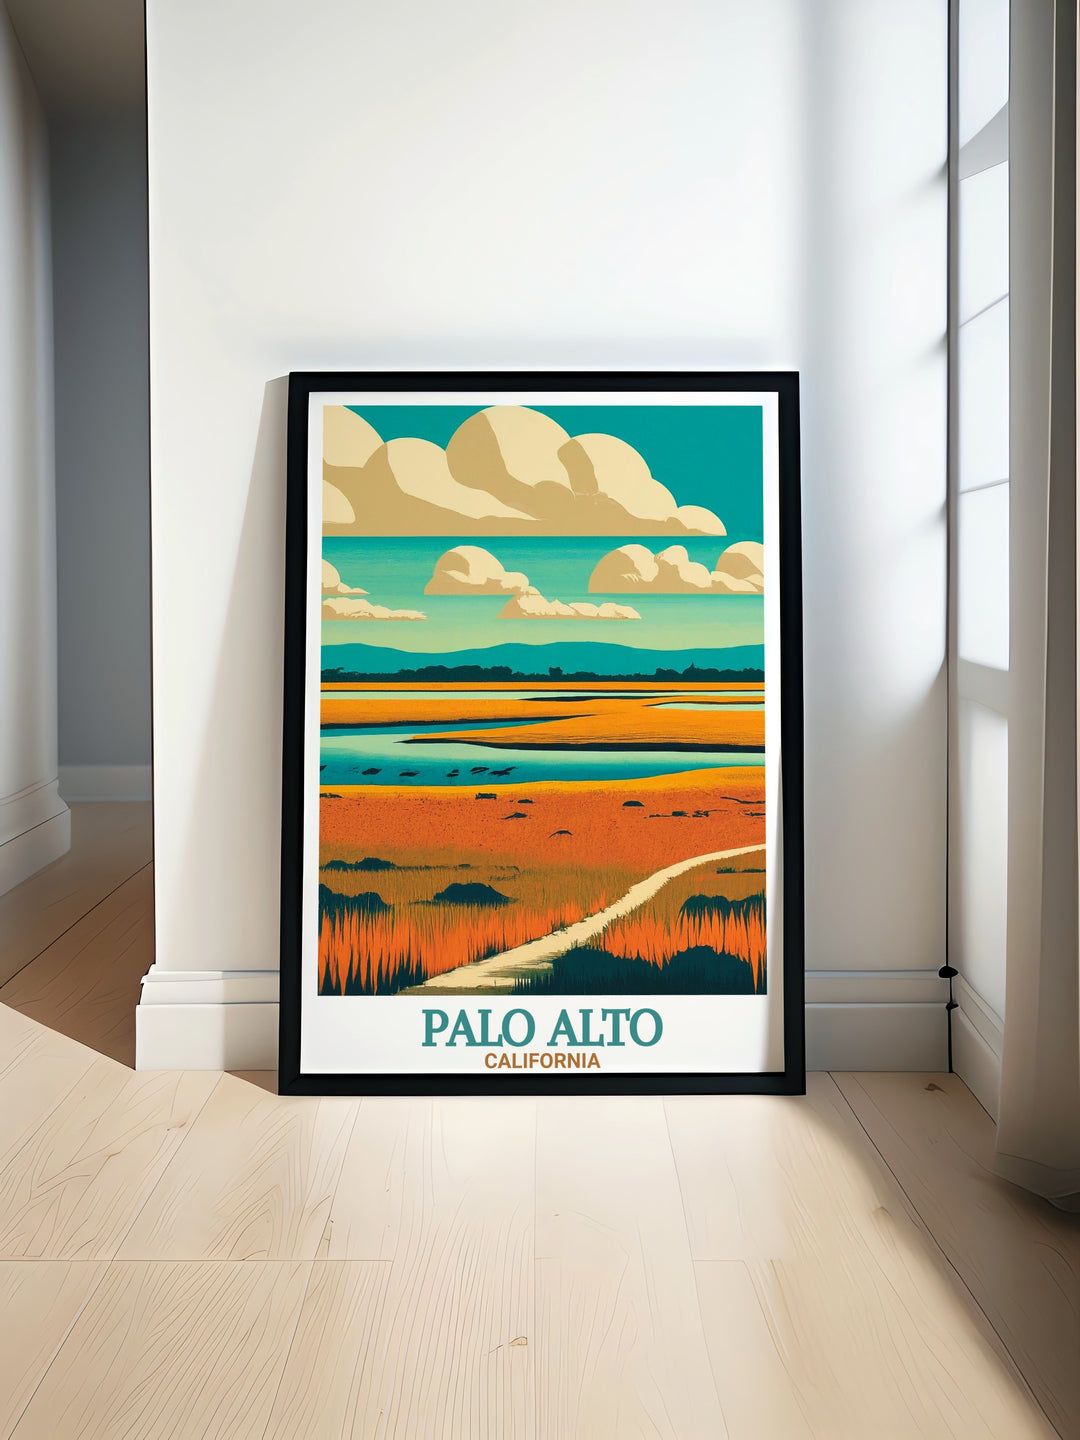 Vintage poster of Palo Alto Baylands Nature Preserve showcasing the blend of urban and natural landscapes in Palo Alto California with vibrant colors and intricate design perfect for home or office decor as a unique travel poster print.